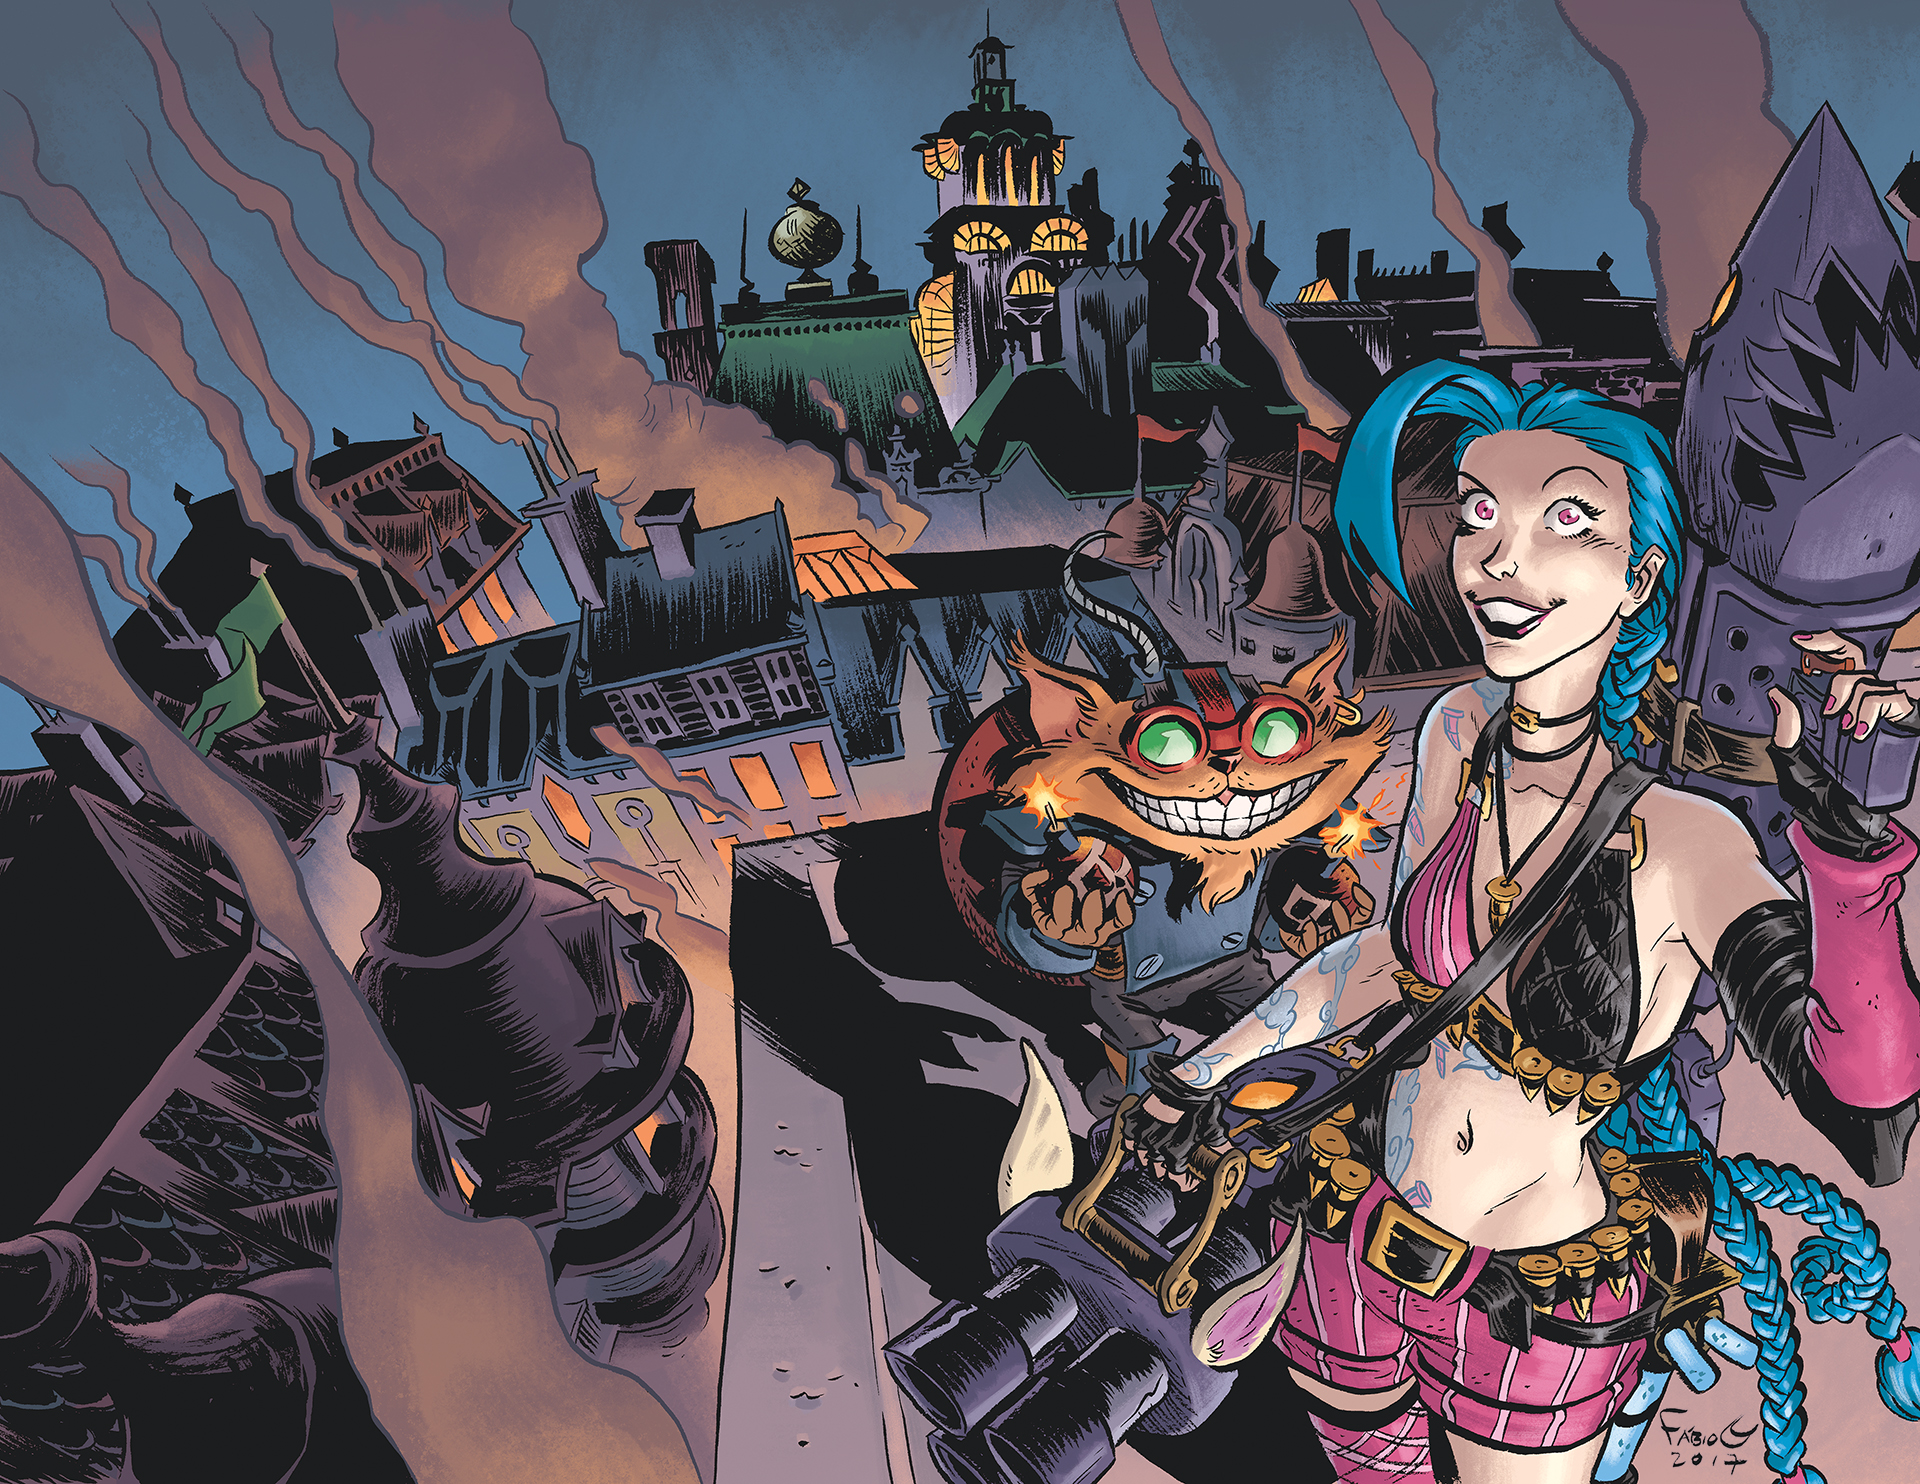 Ziggs and Jinx Paint the Town cover 02.jpg